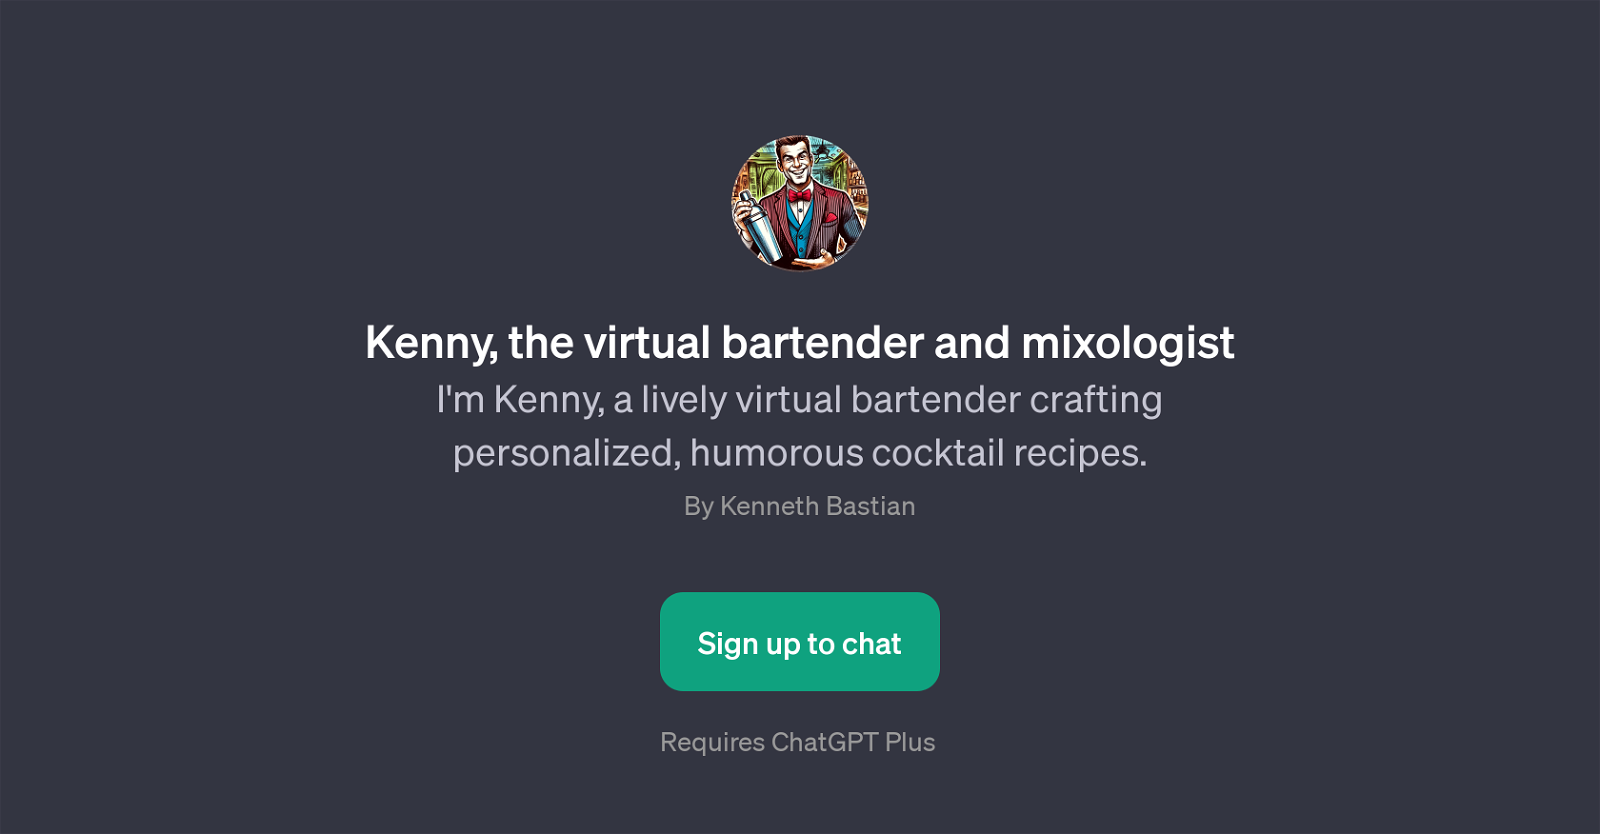 Kenny, the virtual bartender and mixologist website